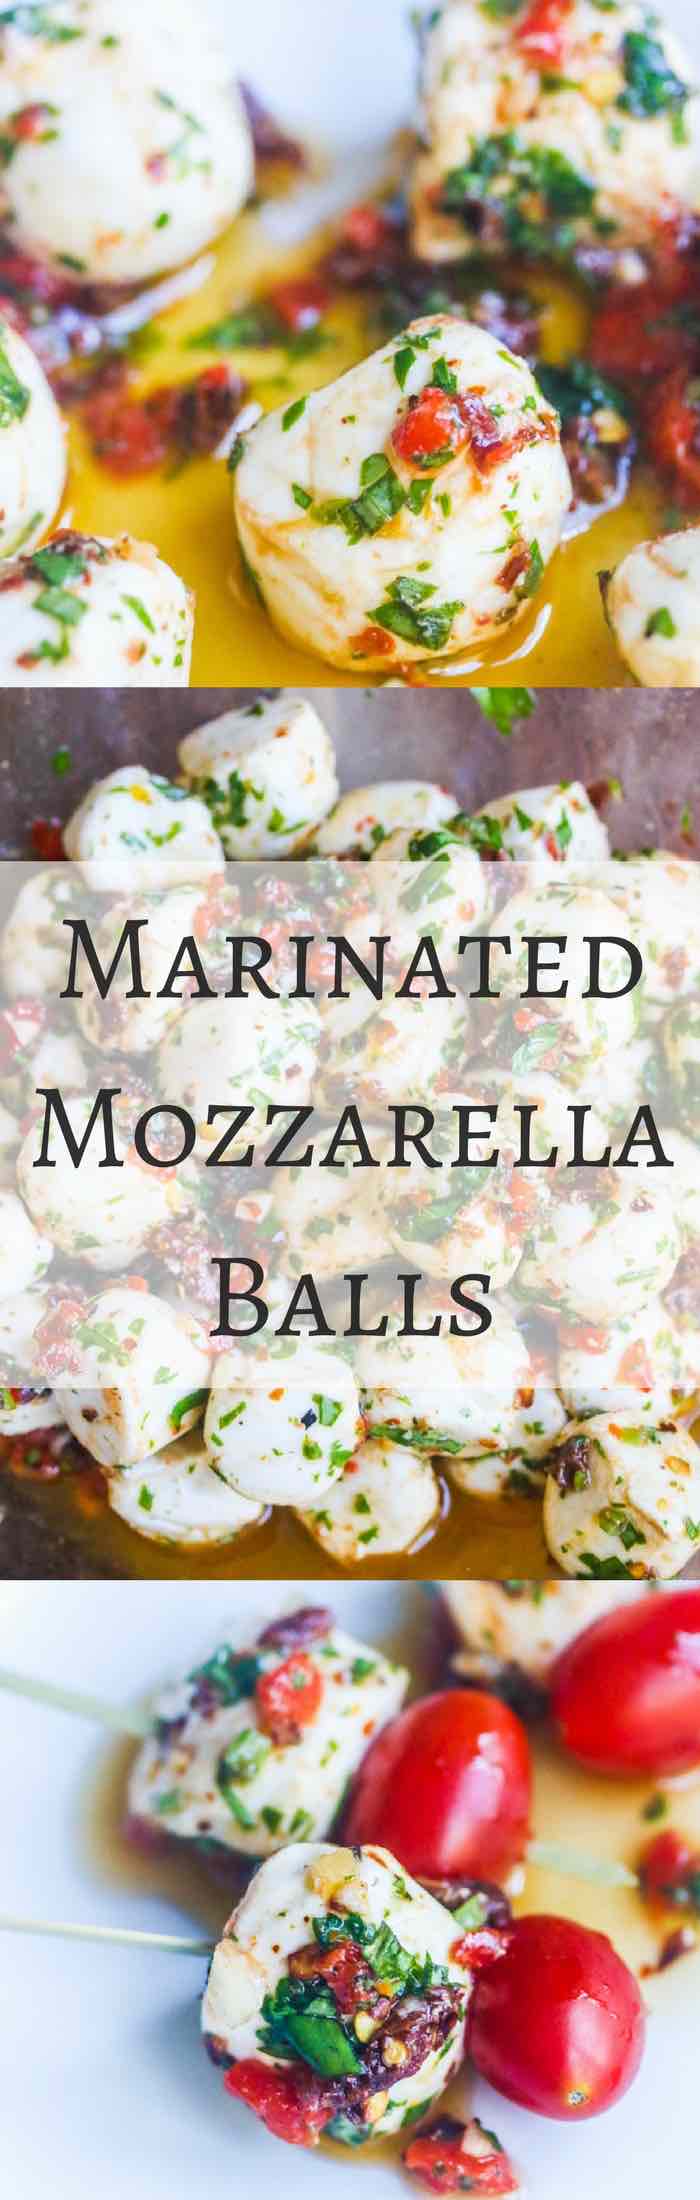 Marinated Mozzarella Balls - skewer with cherry tomatoes for a party appetizer - always a party favorite - super easy and delicious